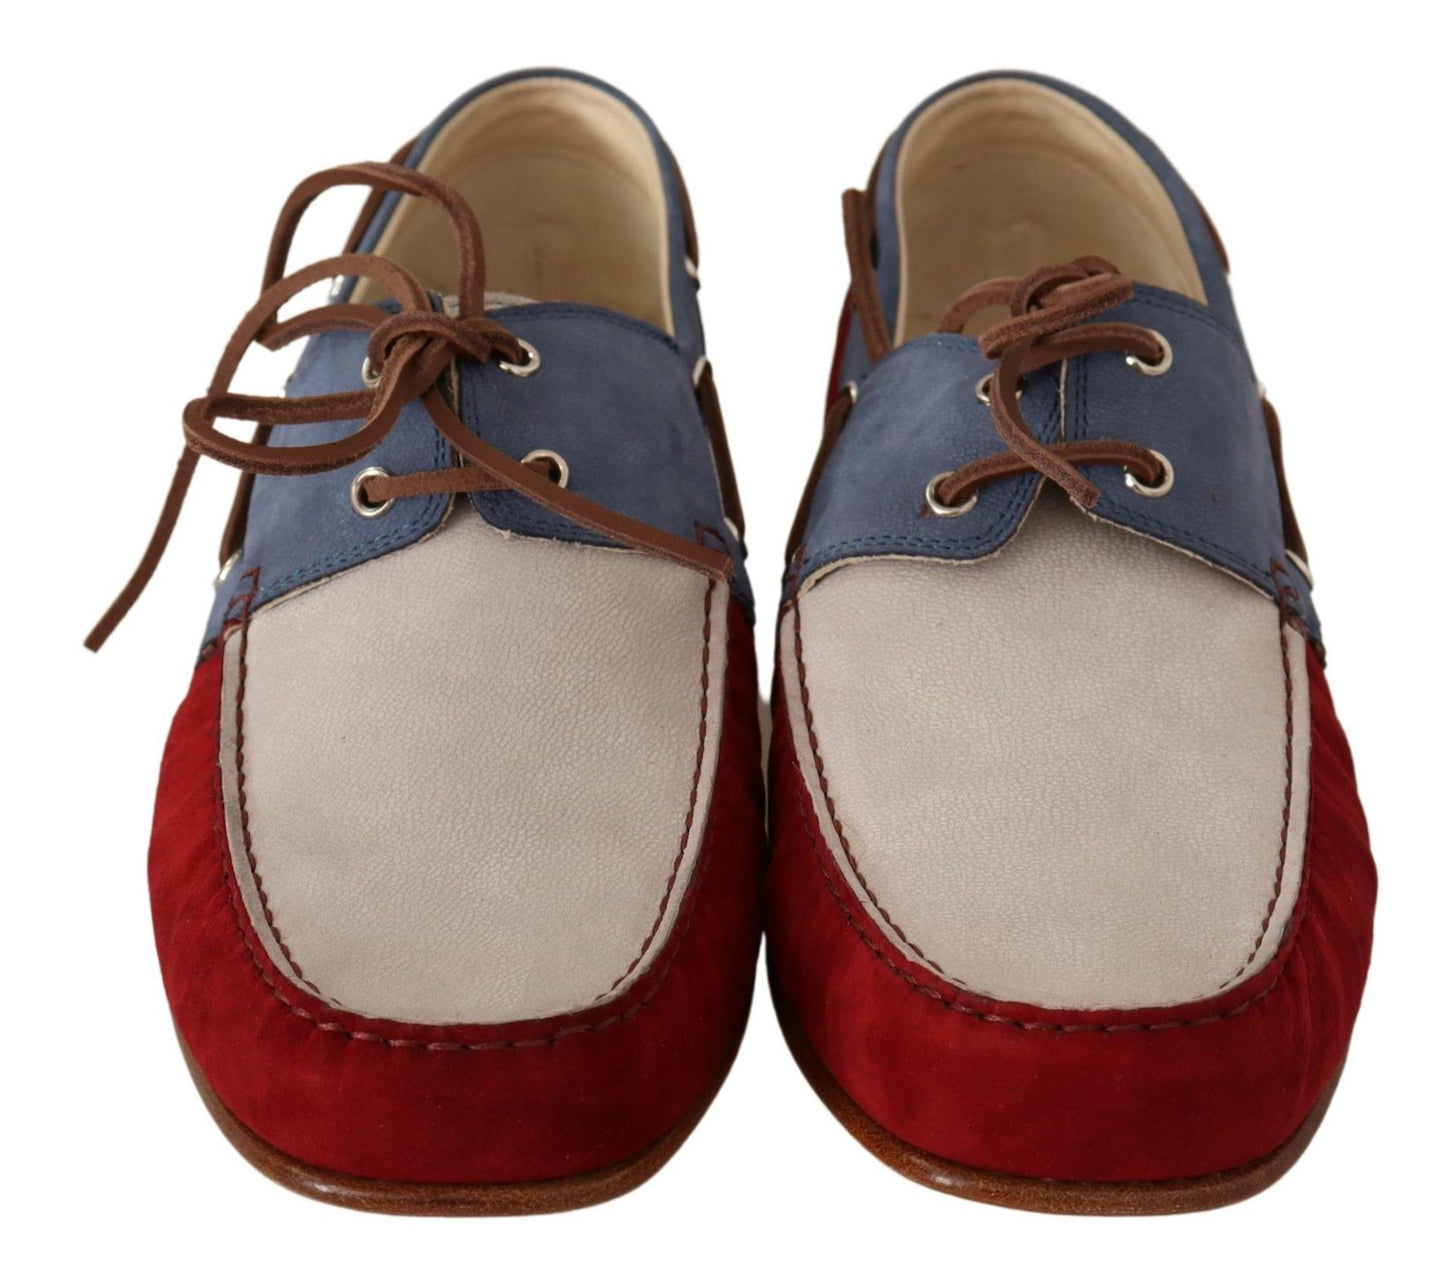 Multicolor Suede Flat Boat Lace Up Loafer Shoes